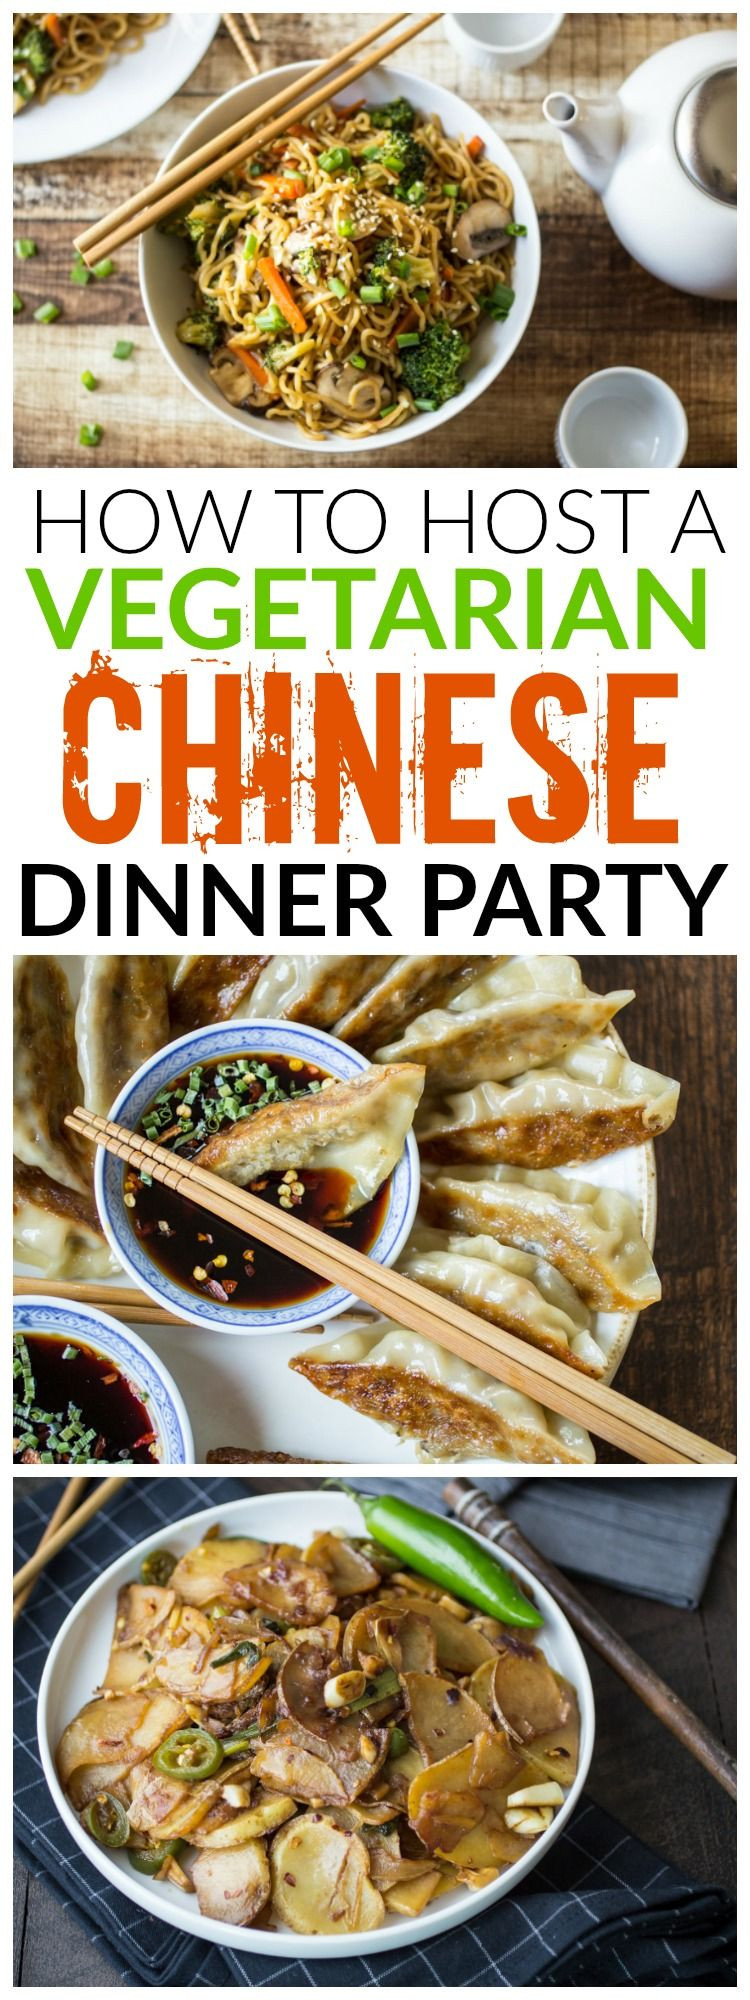 Vegetarian Dinner Party Menu Ideas
 Looking for some fun inspiration for your next dinner